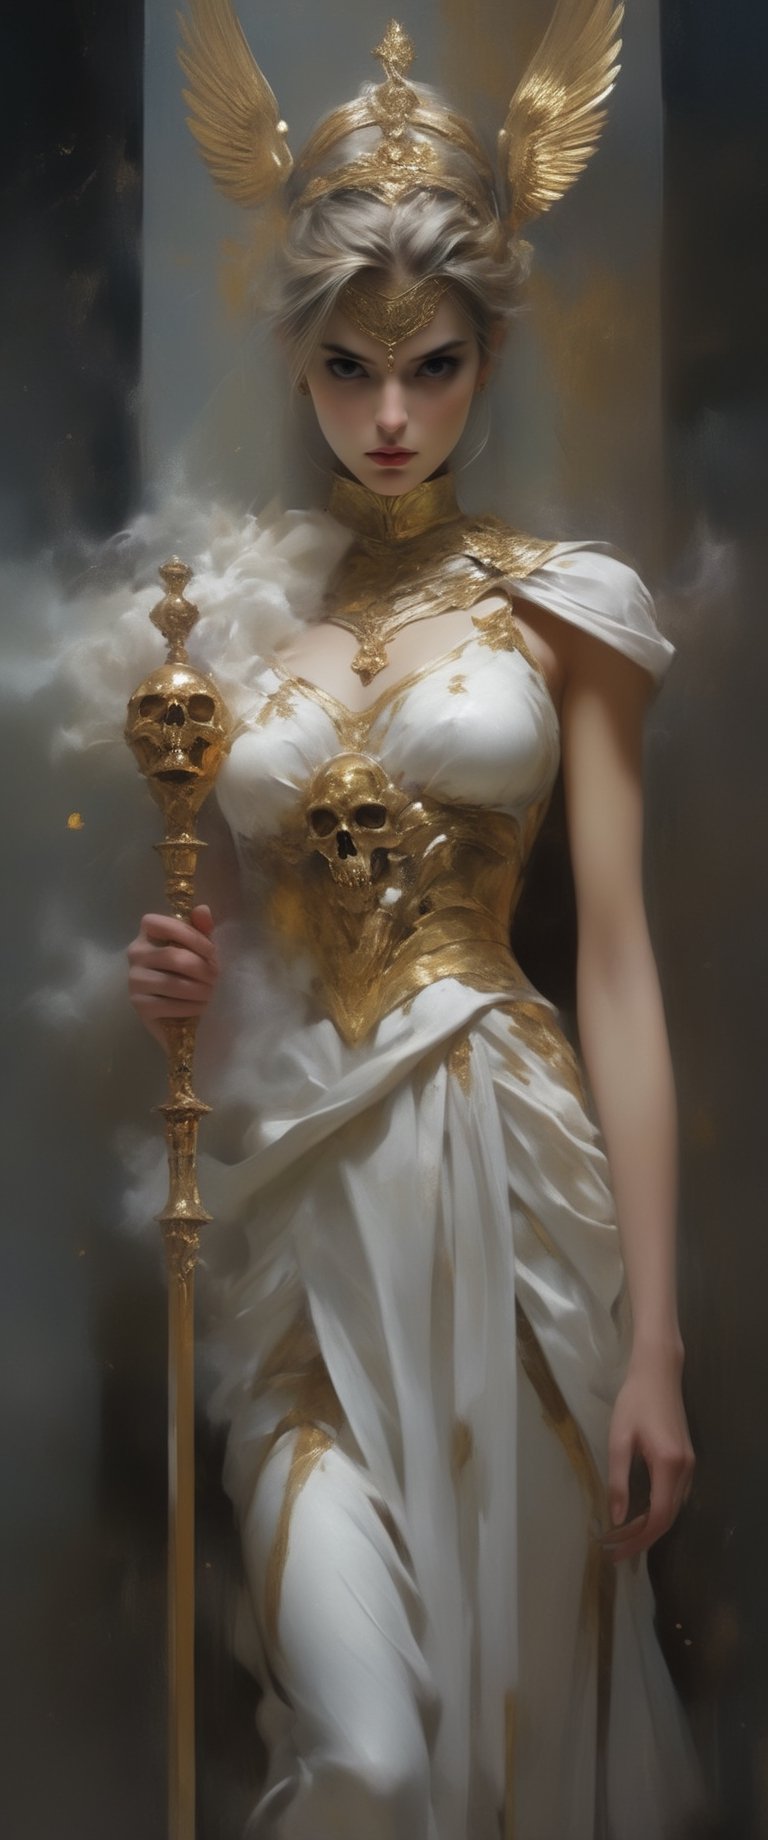 breathtaking ethereal RAW photo of female ((athena, god with a scepter in from of an altar, golden armor

 )), dark and moody style, perfect face, outstretched perfect hands . masterpiece, professional, award-winning, intricate details, ultra high detailed, 64k, dramatic light, volumetric light, dynamic lighting, Epic, splash art .. ), by james jean $, roby dwi antono $, ross tran $. francis bacon $, michal mraz $, adrian ghenie $, petra cortright $, gerhard richter $, takato yamamoto $, ashley wood, tense atmospheric, , , , sooyaaa,IMGFIX,Comic Book-Style,Movie Aesthetic,action shot,photo r3al,bad quality image,oil painting, cinematic moviemaker style,Japan Vibes,H effect,koh_yunjung ,koh_yunjung,kwon-nara,sooyaaa,colorful,bones,skulls,armor,han-hyoju-xl
,DonMn1ghtm4reXL, ct-nijireal,Seiya Pegasus